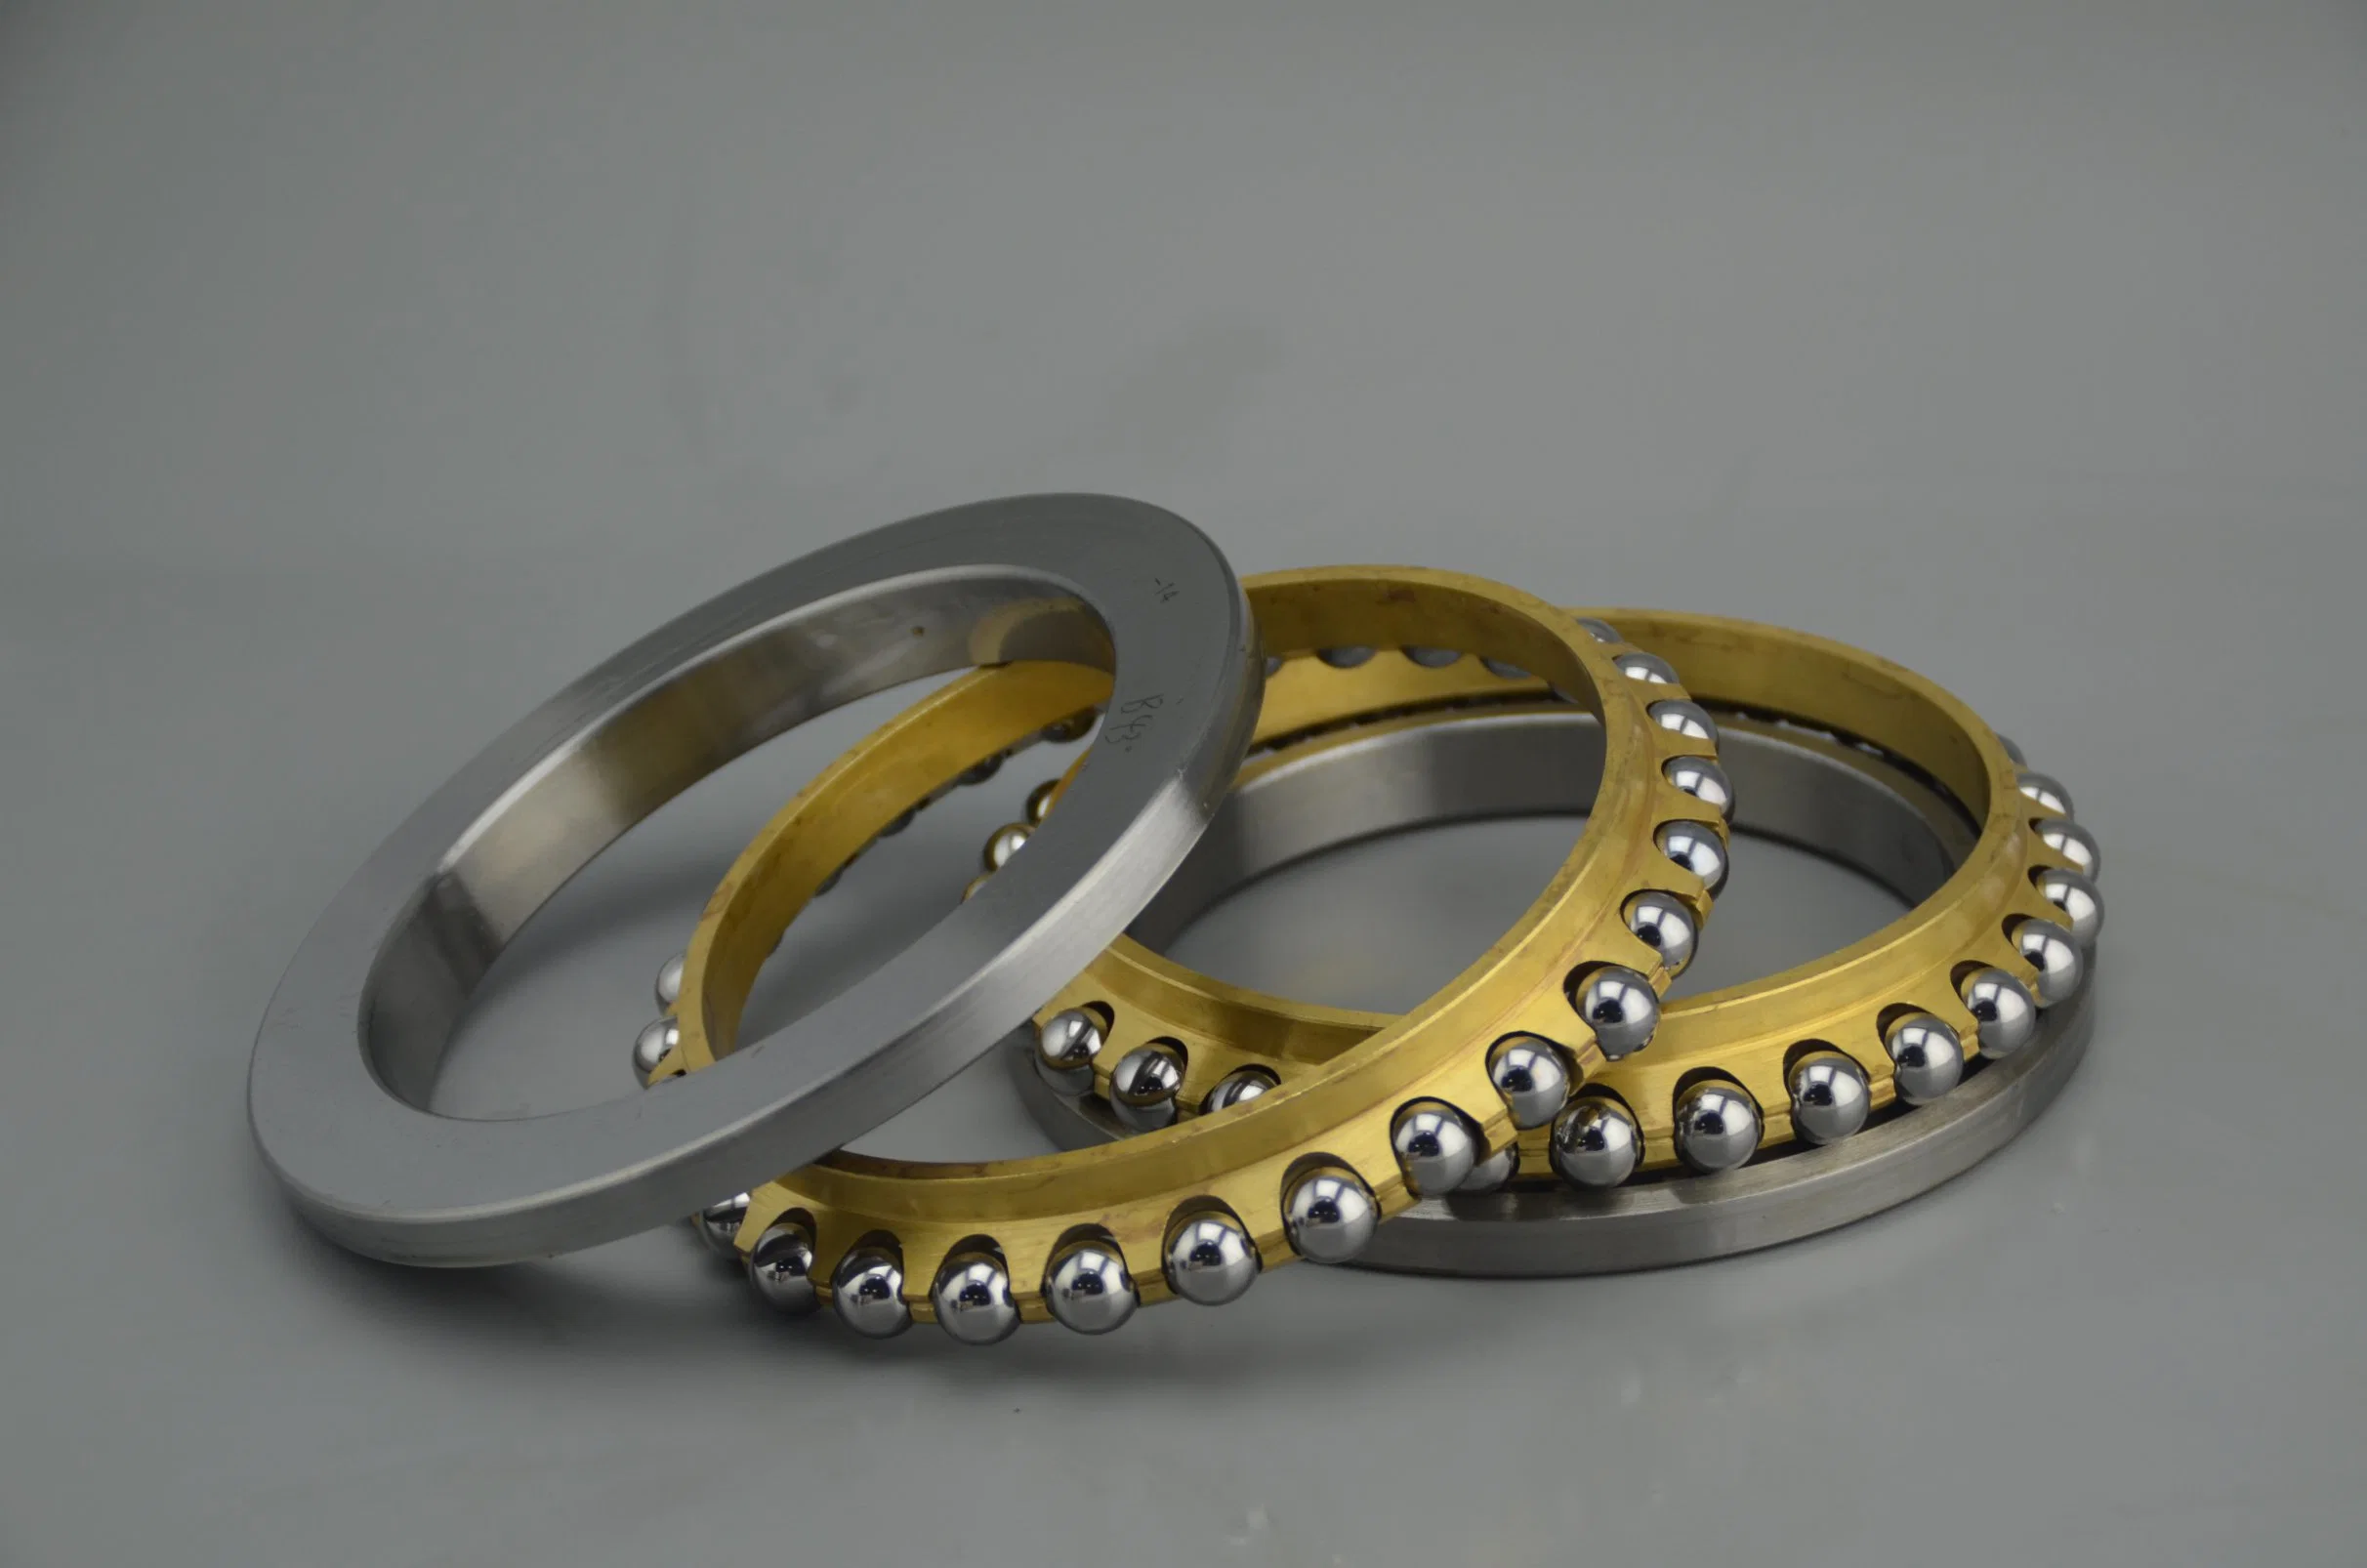 Zys Separated Bearing Double Direction Angular Contact Thrust Ball Bearing 234711m for Machine Tool Main Shaft